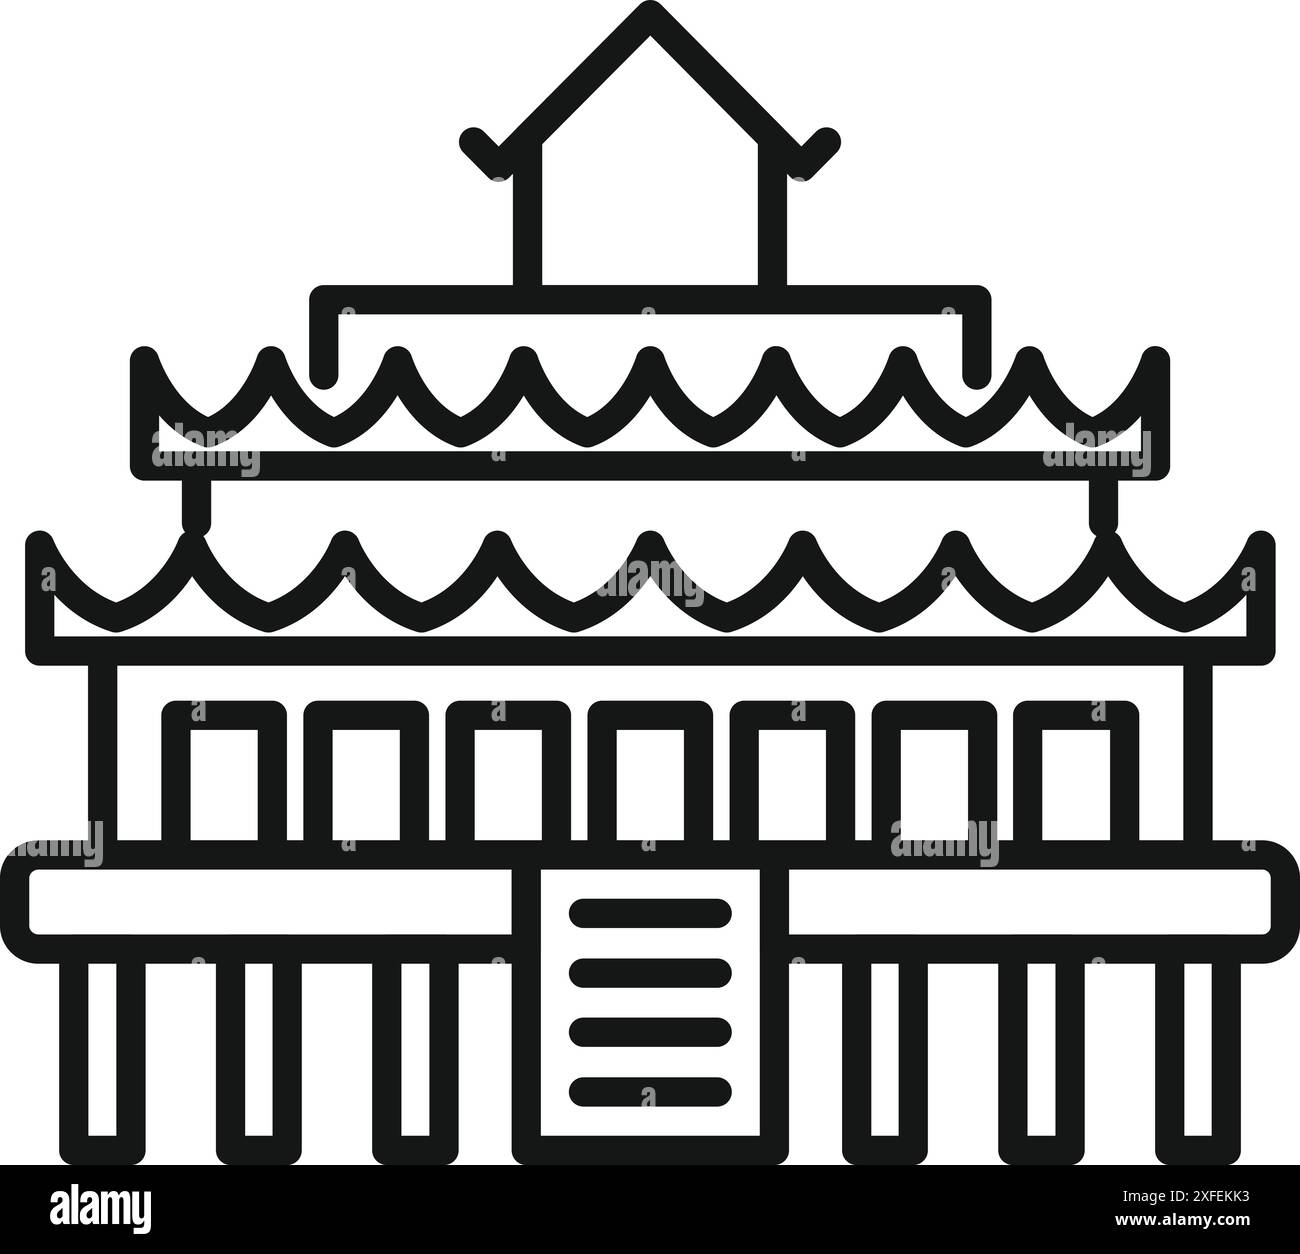 Simple line icon of a traditional asian house, with a curved roof and standing on stilts Stock Vector